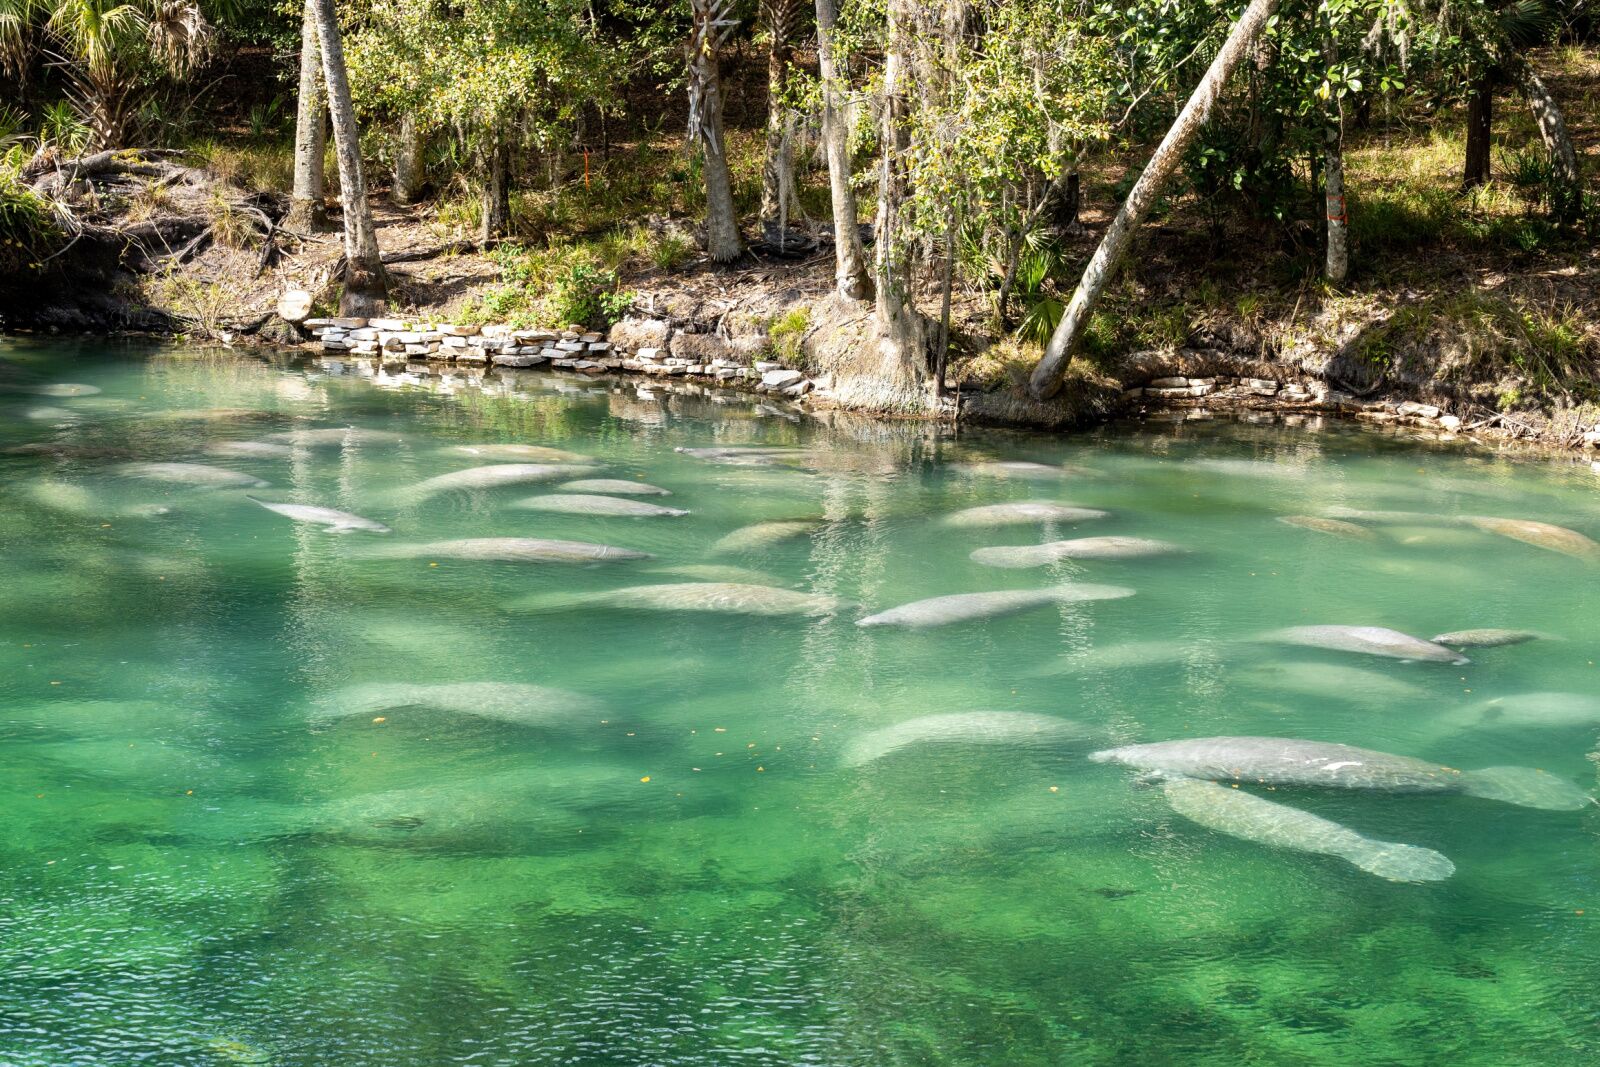 blue spring state parks - one of the best things to do in orlando besides theme parks 